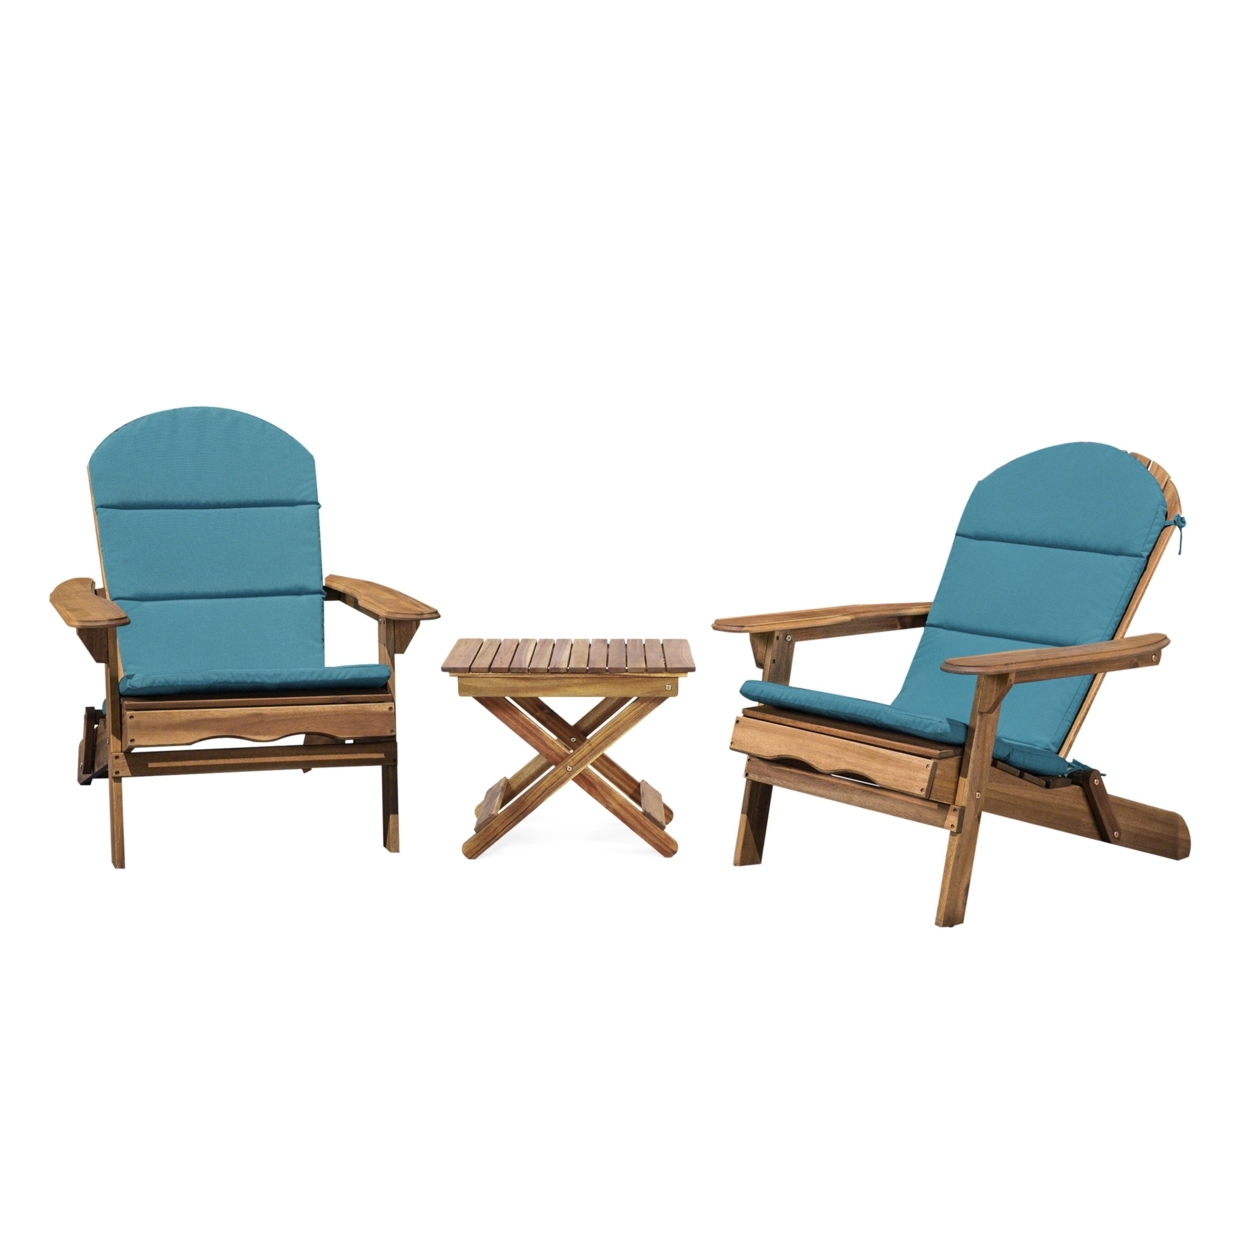 Reed Outdoor 2 Seater Acacia Wood Chat Set With Water Resistant Cushions - Navy Blue/gray